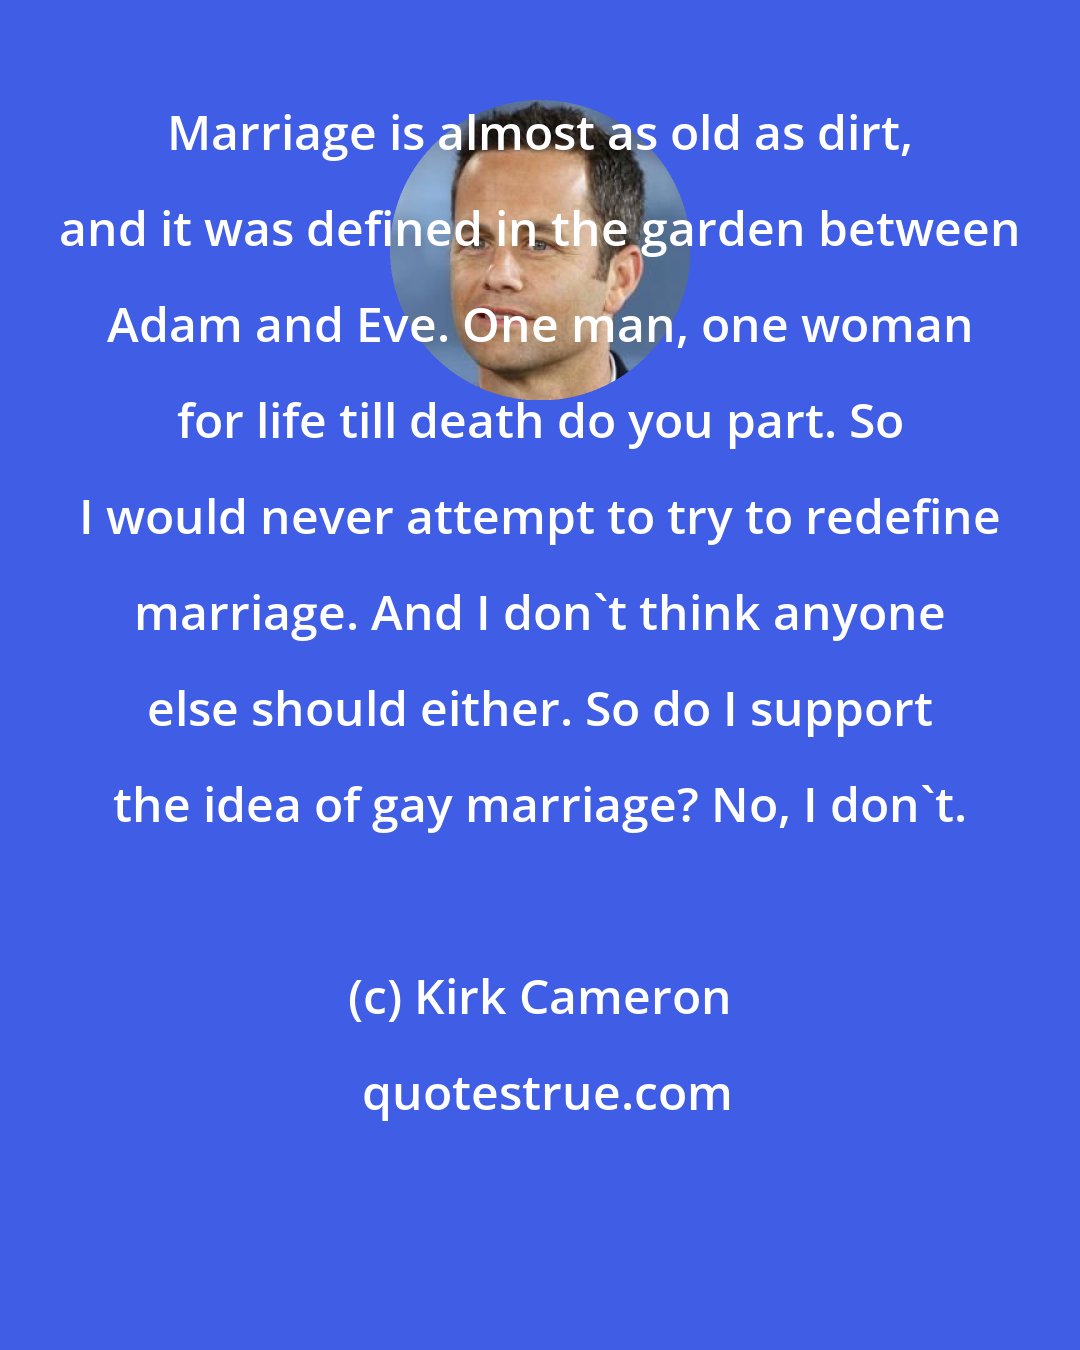 Kirk Cameron: Marriage is almost as old as dirt, and it was defined in the garden between Adam and Eve. One man, one woman for life till death do you part. So I would never attempt to try to redefine marriage. And I don't think anyone else should either. So do I support the idea of gay marriage? No, I don't.